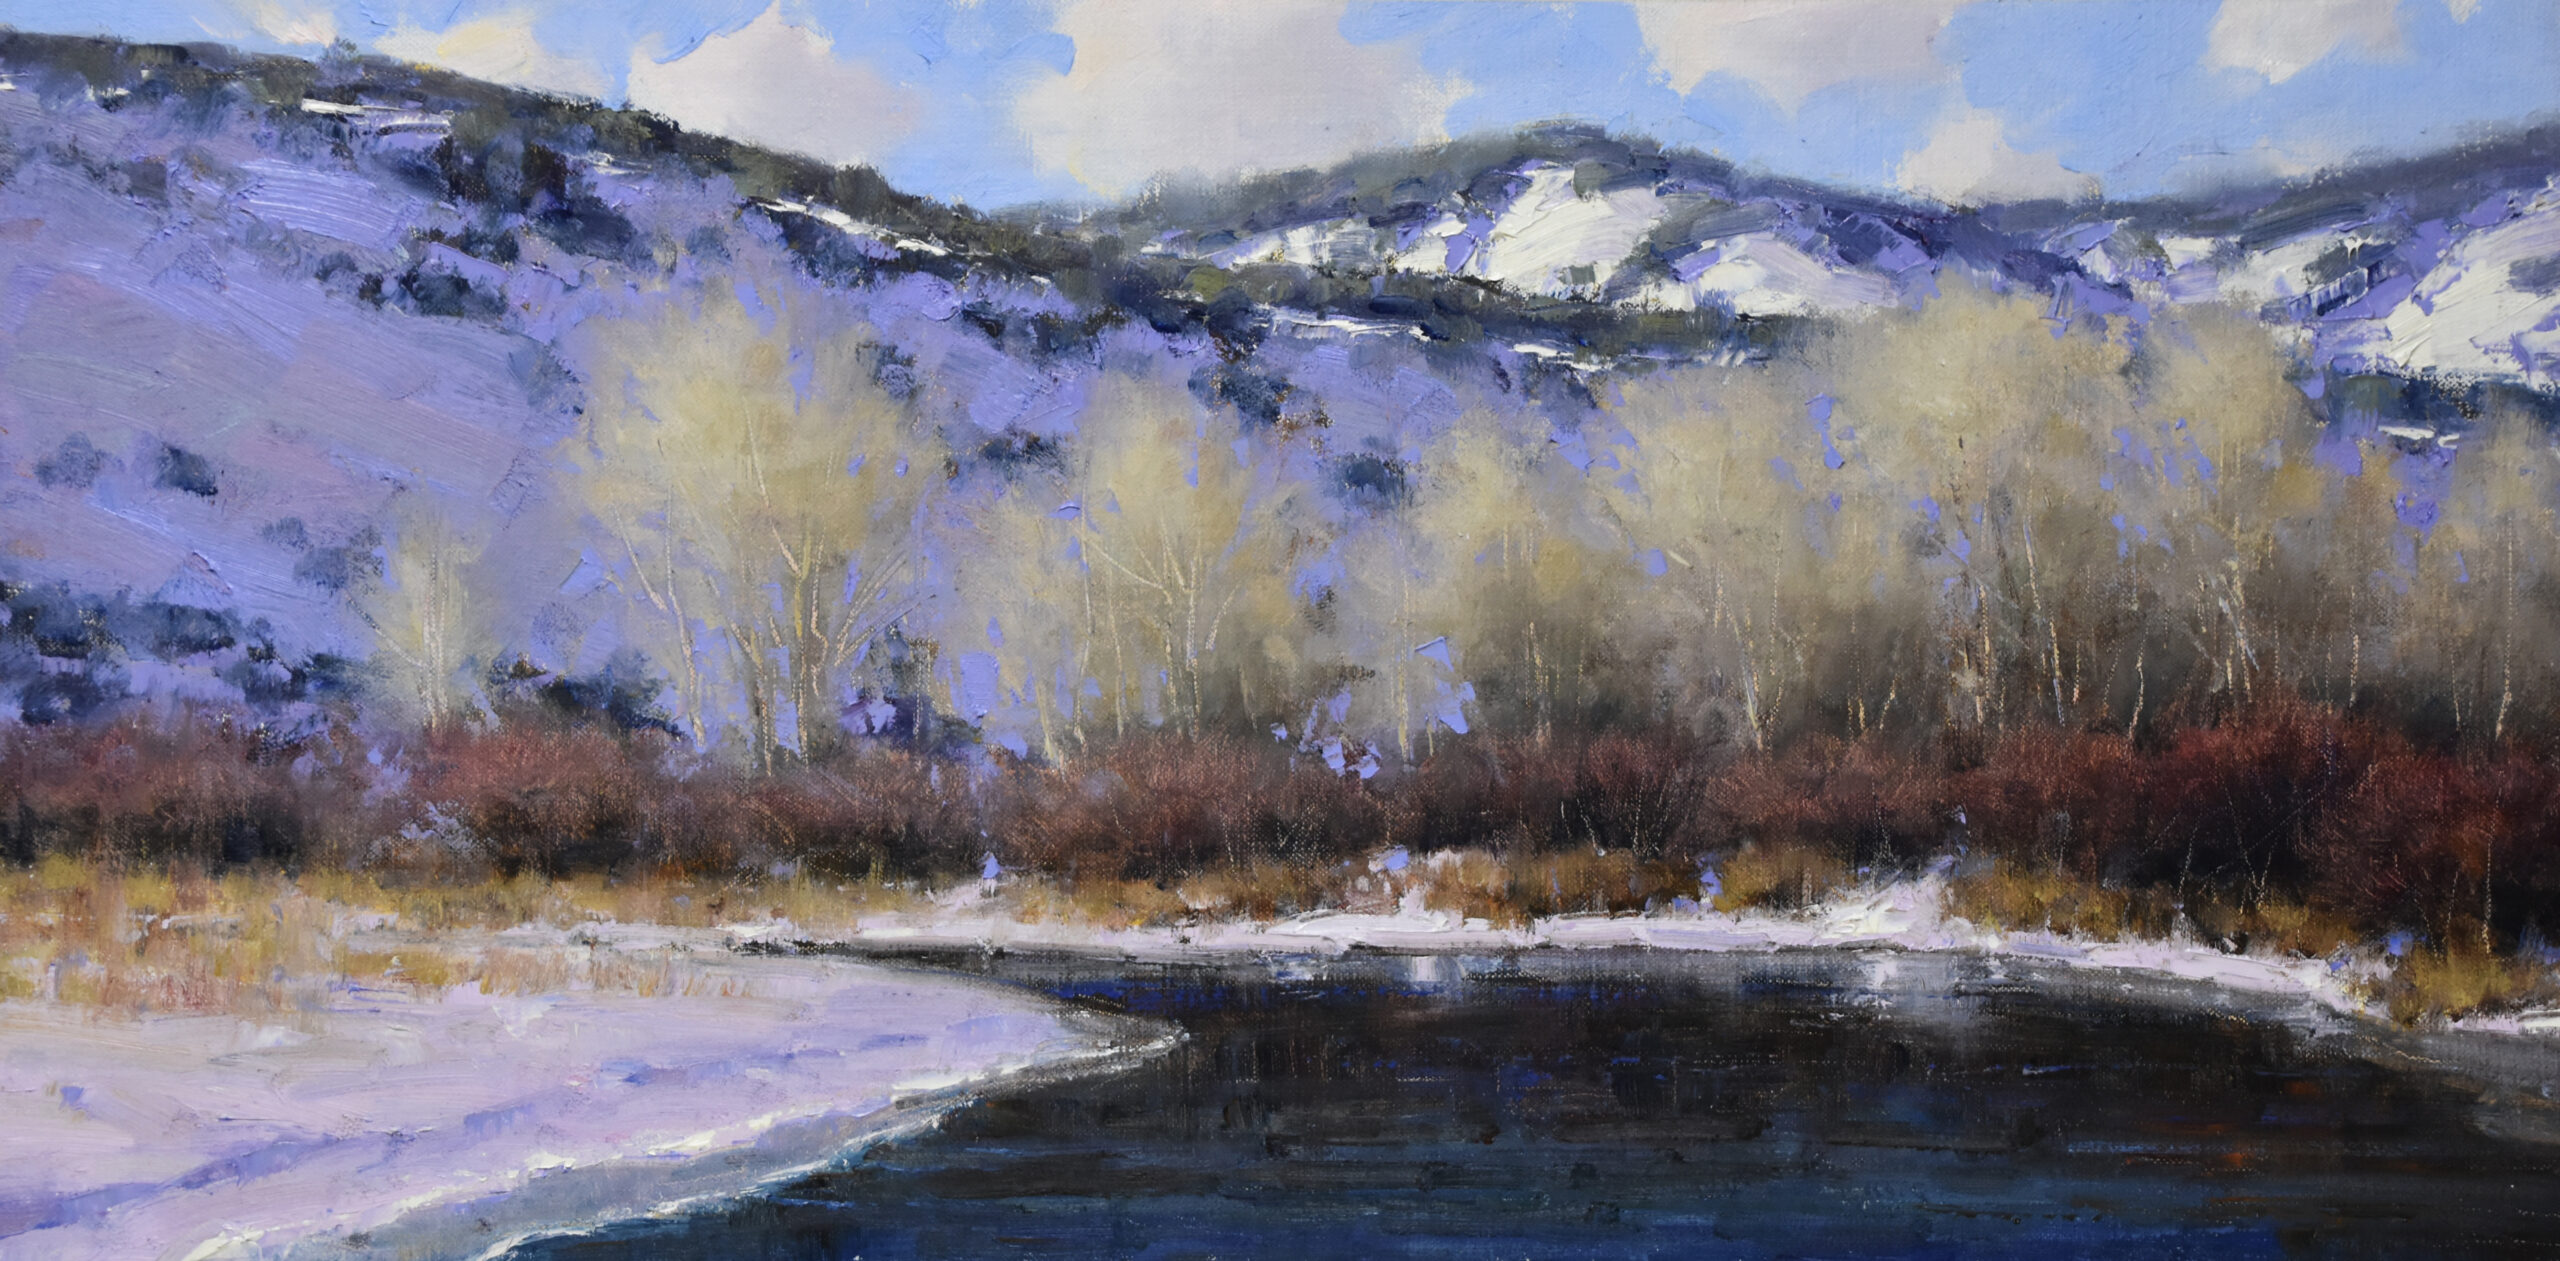 Dan Young - Reflecting on Winter